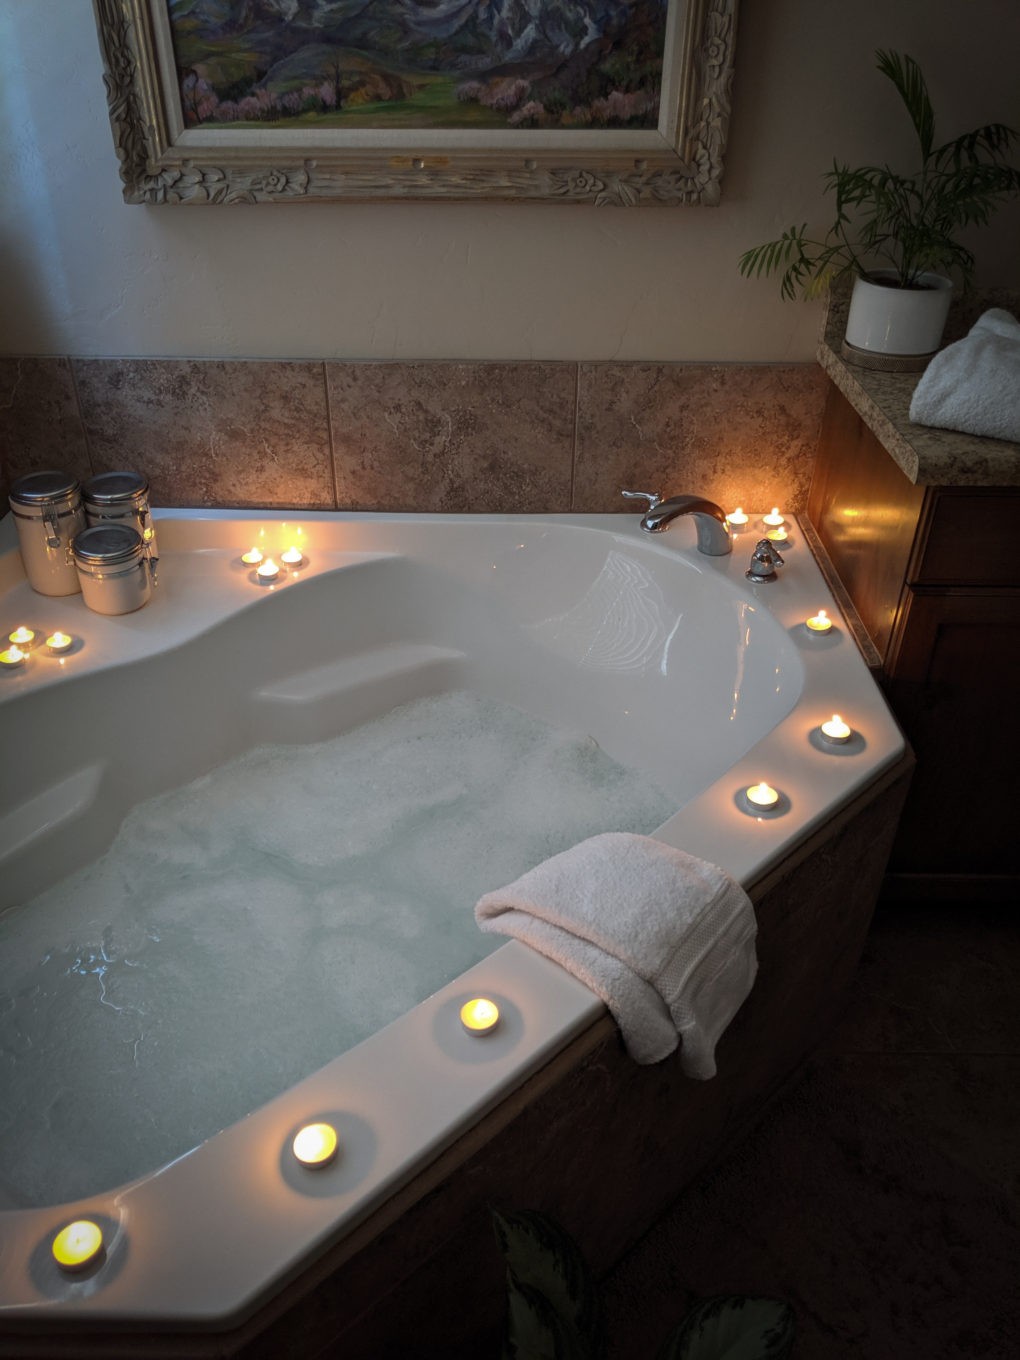 3. Turn off the lights and light some candles. Ten ways to make your bath extra relaxing. The ultimate bathtime experience in the tub includes ideas like turning off the lights and lighting candles by the bathtub, sipping a cold drink and snacking on treats, using a bath bomb, etc. Learn how to treat yourself right with a soothing bath fit for a spa.